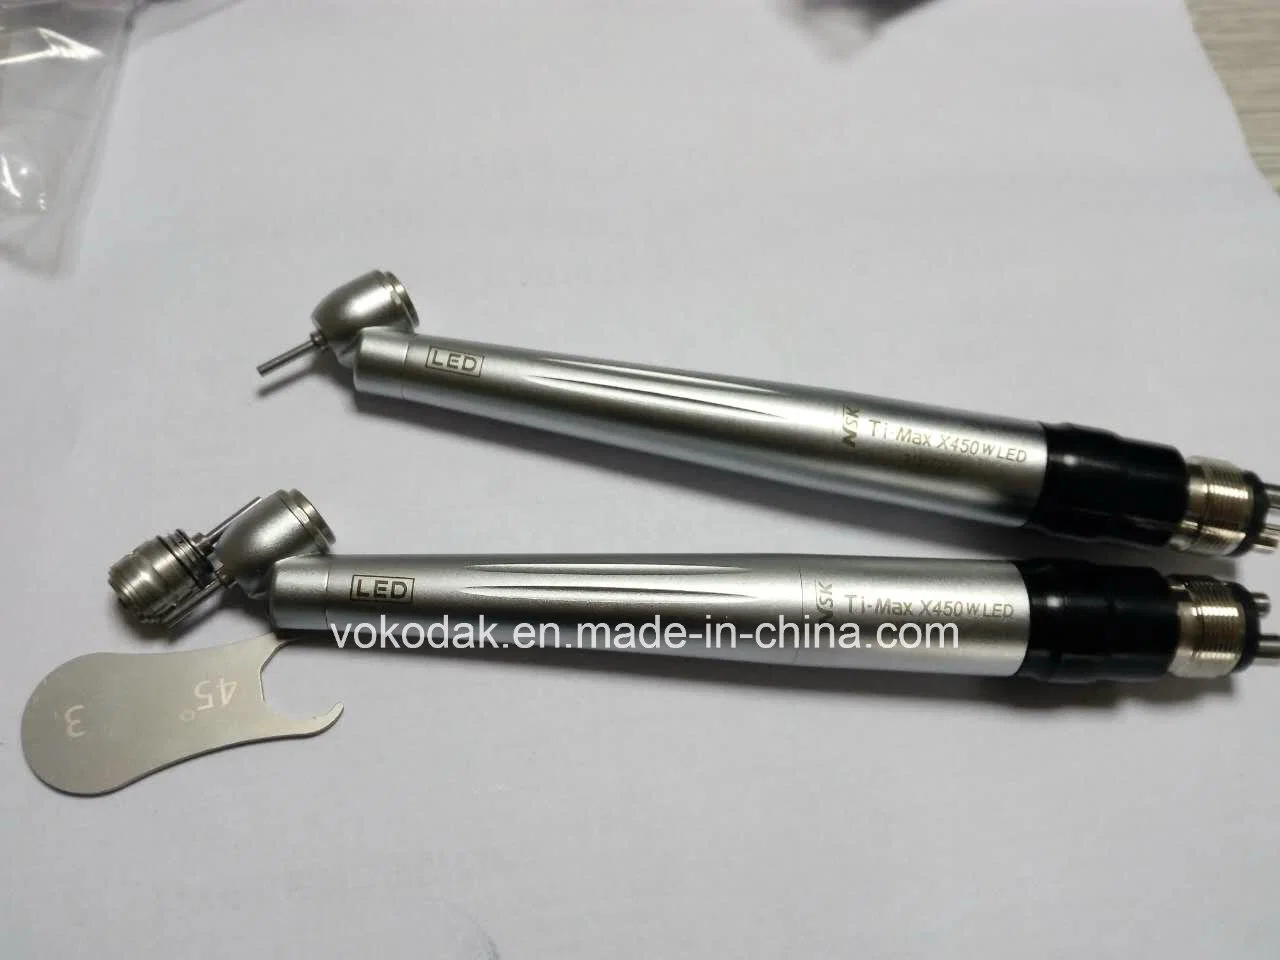 High Quality Handpiece Manufacture 45 Degree Dental Handpiece with LED Light